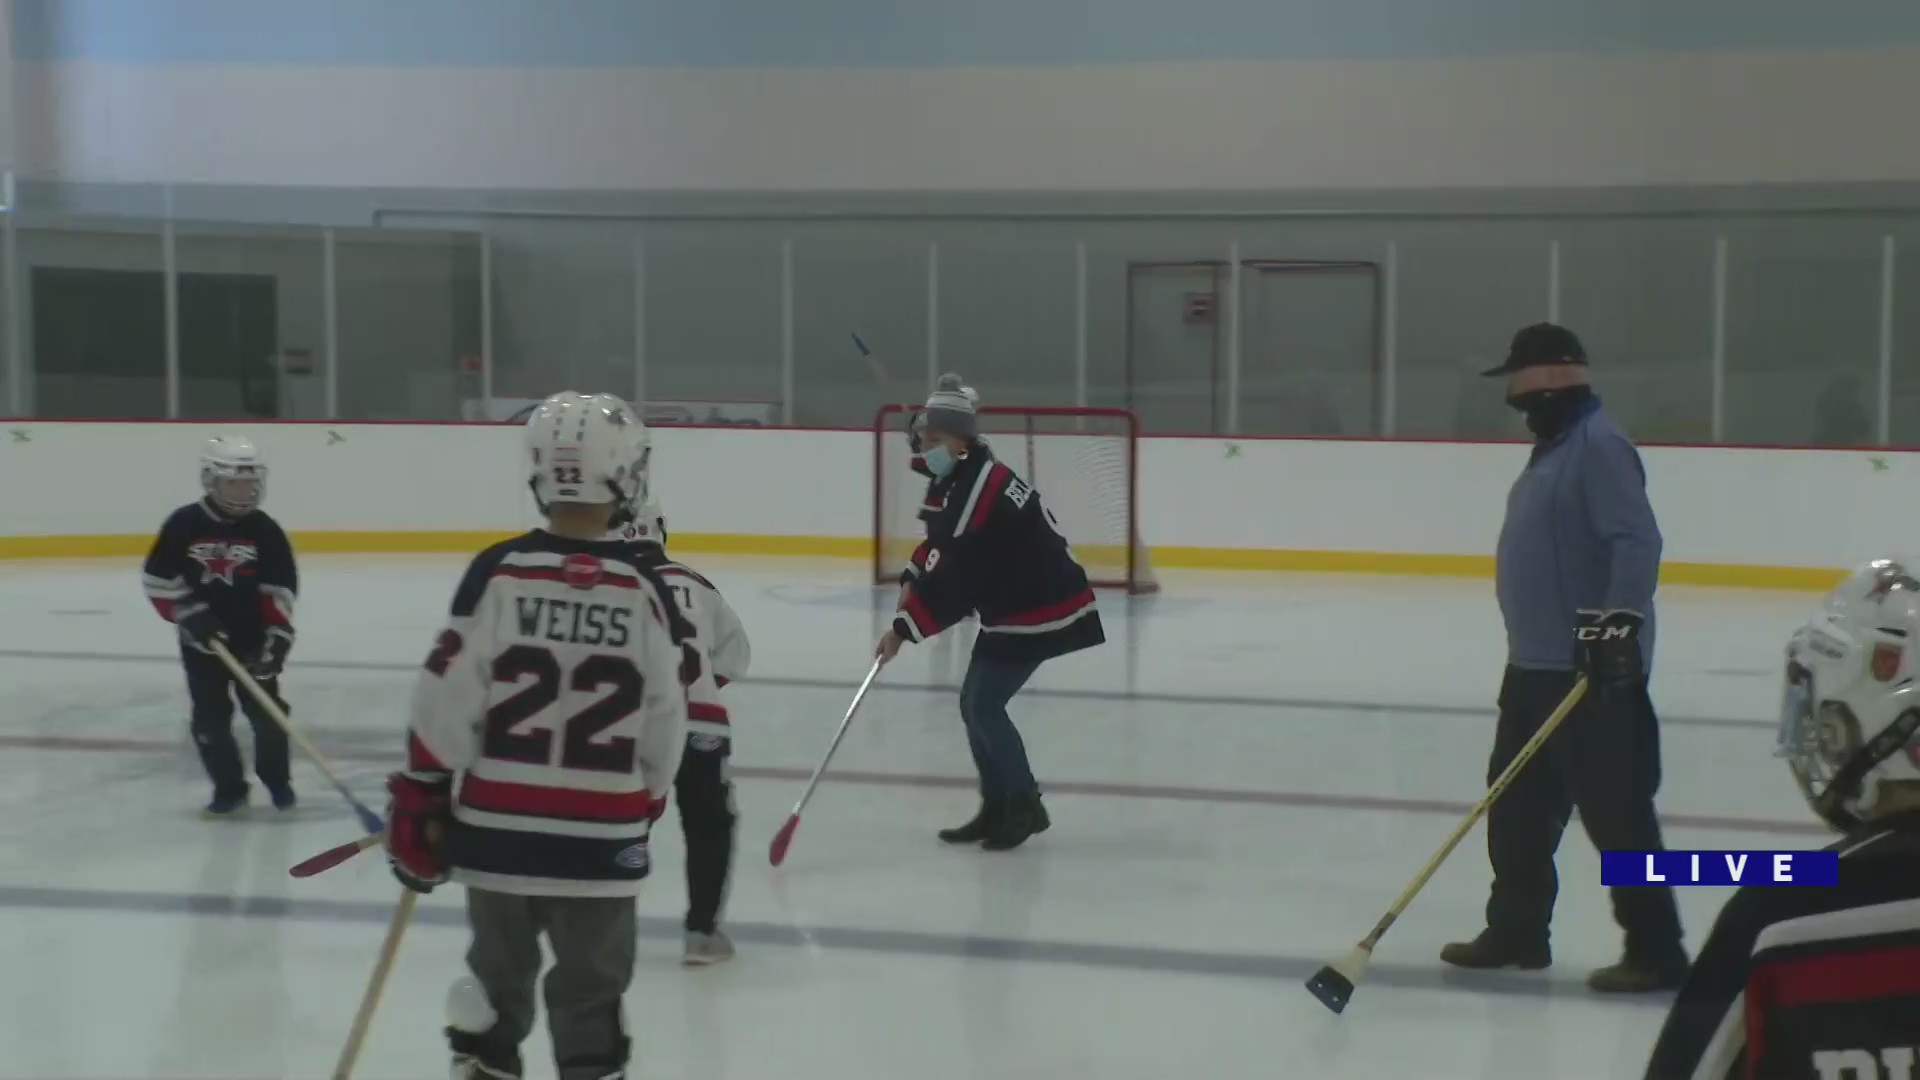 Around Town checks out the newly renovated, Glenview Community Ice Center